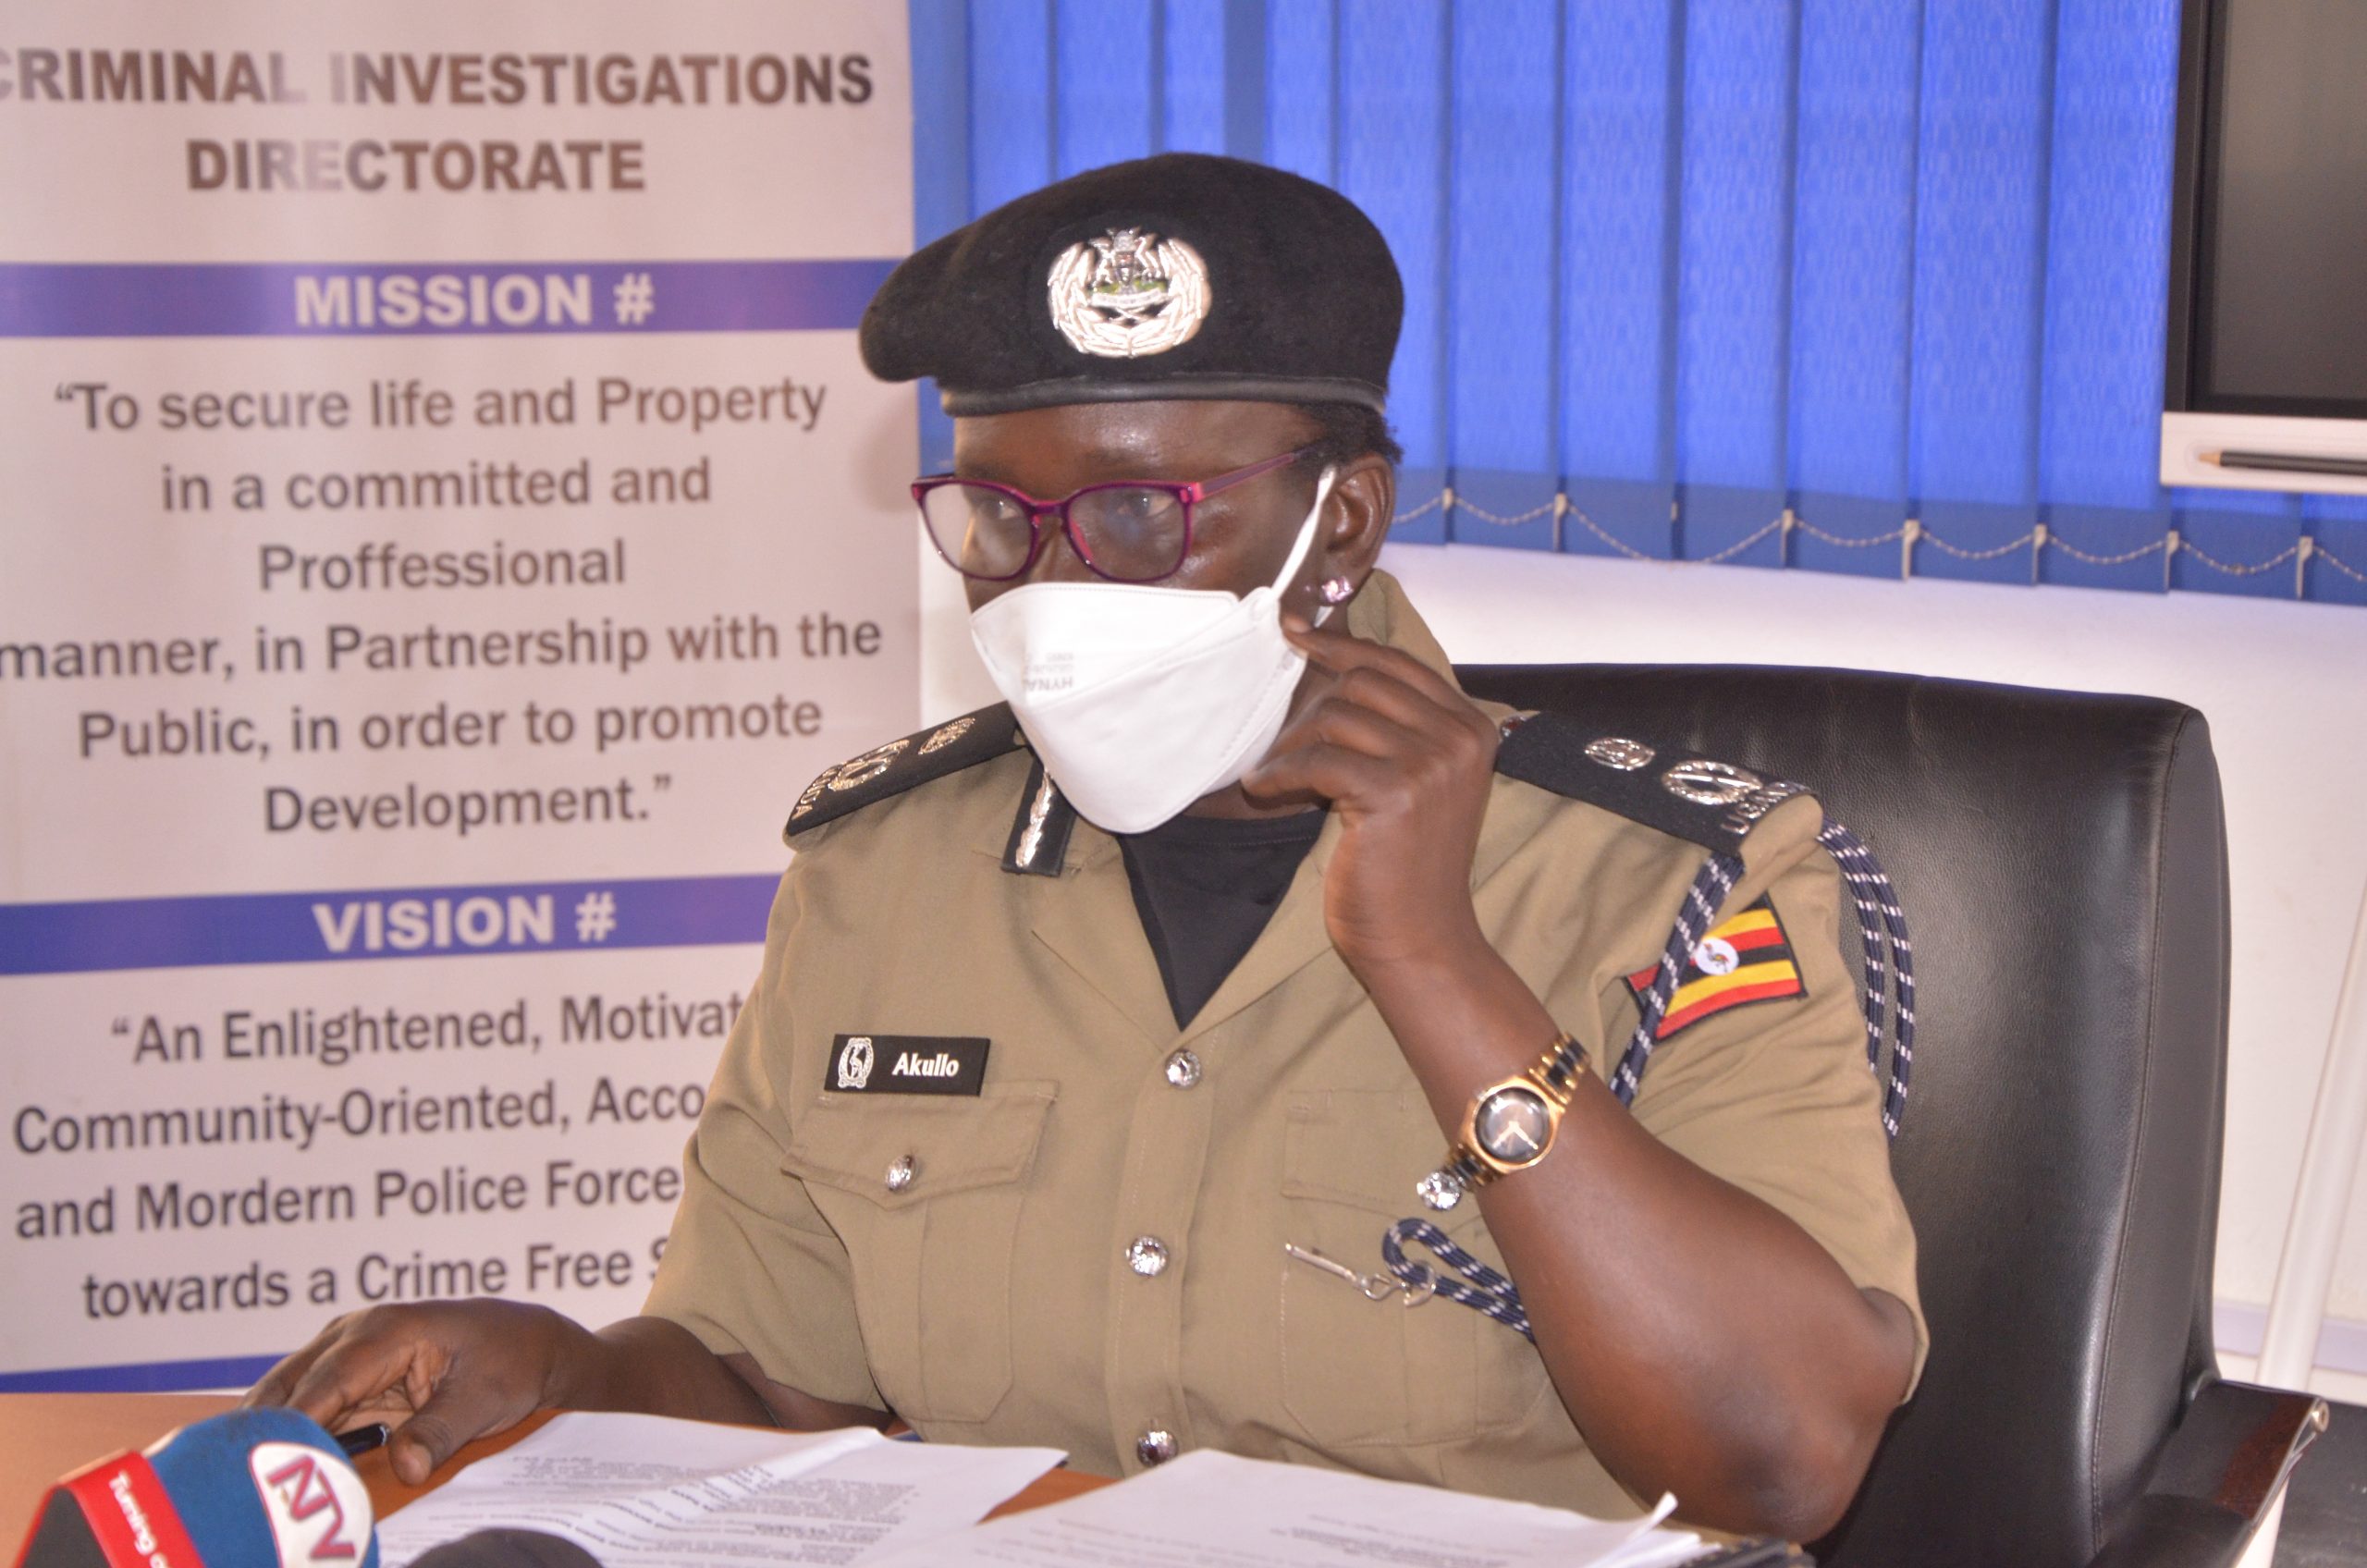 REPORT ON MAJOR CASES HANDLED, DEFILEMENT IN SCHOOLS, CRIMINAL SYNDICATES BUSTED, SUCCESS STORIES OF ANTI CRIME INFRASTRUCTURE, SOME KEY CONVICTIONS AND TOKORA OPERATIONS photo